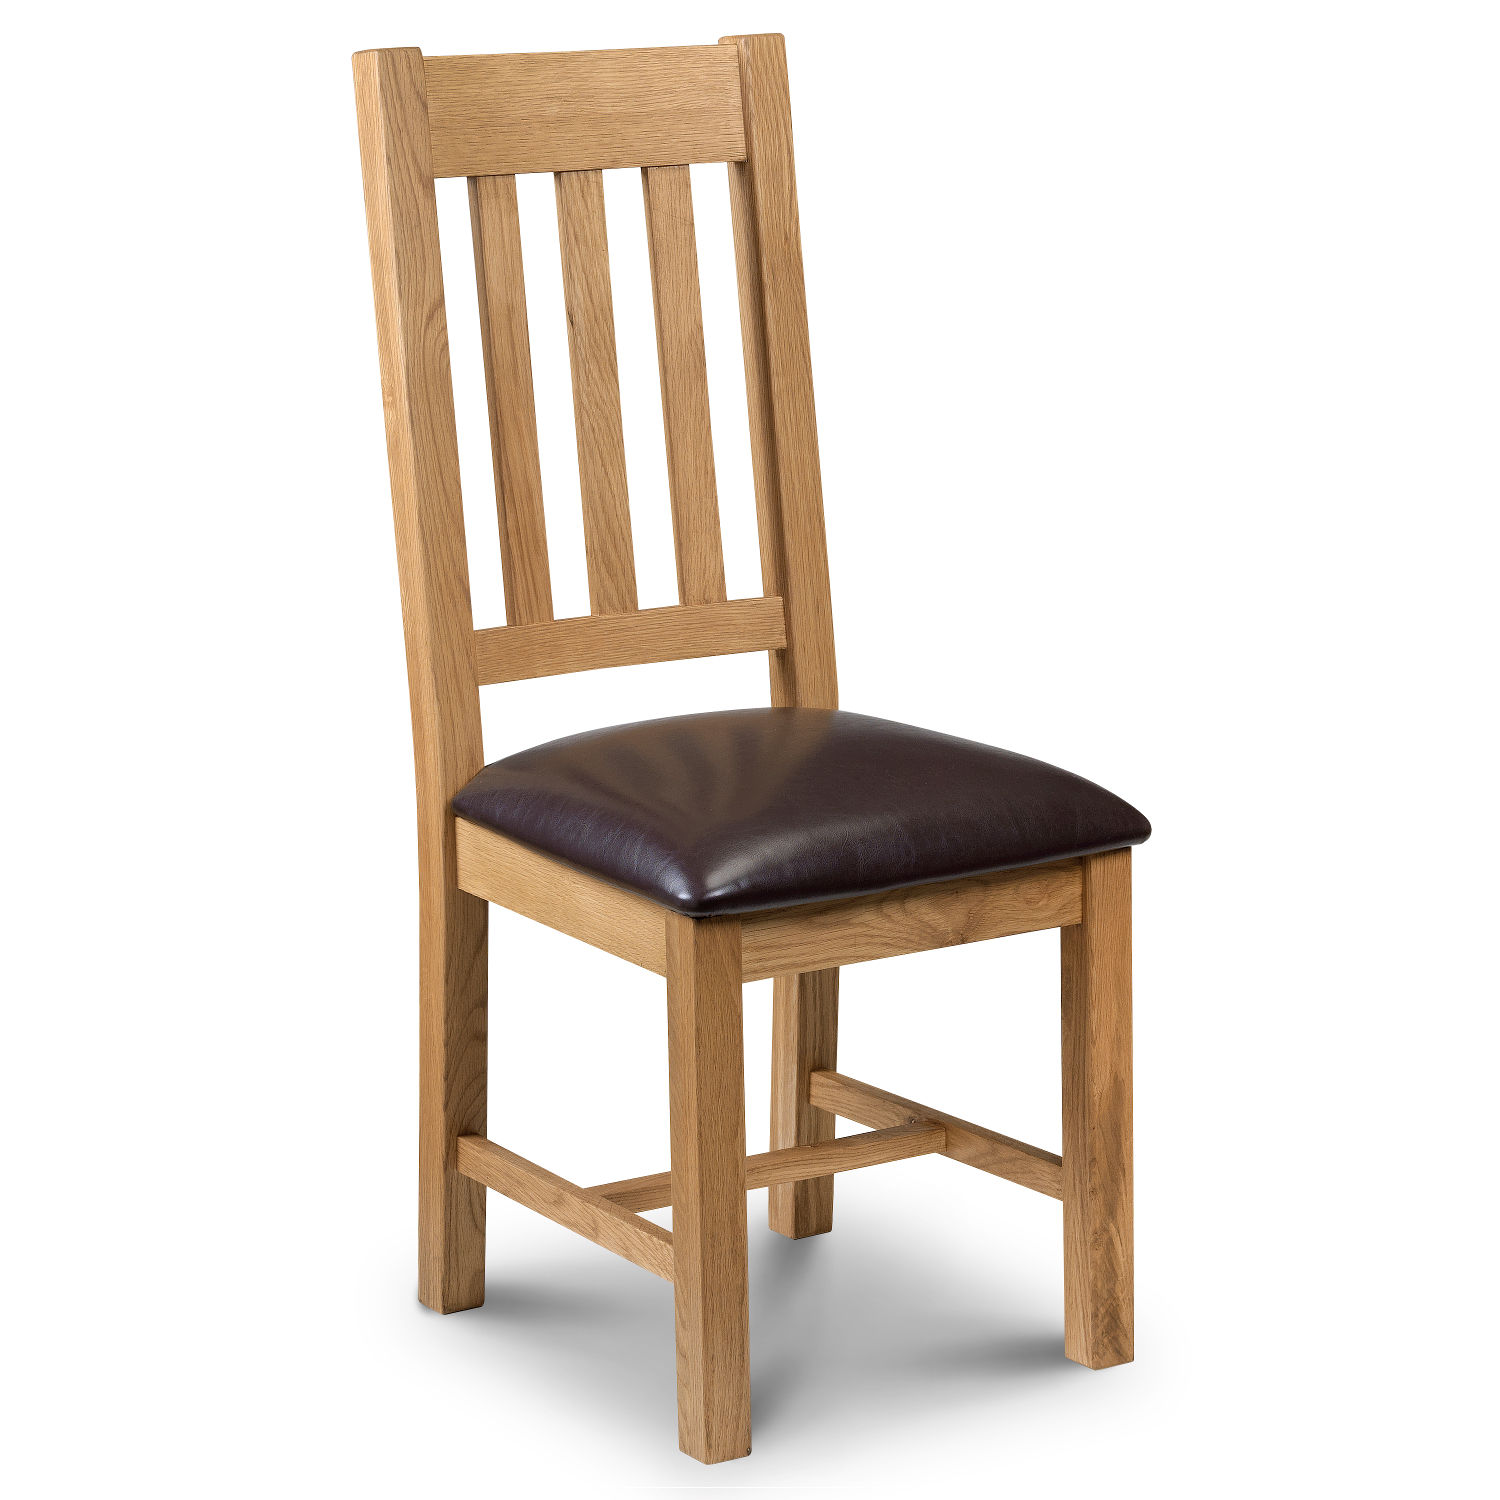 Dining room chair Astoria pair of oak dining room chairs - next day delivery Astoria pair CWMYULB